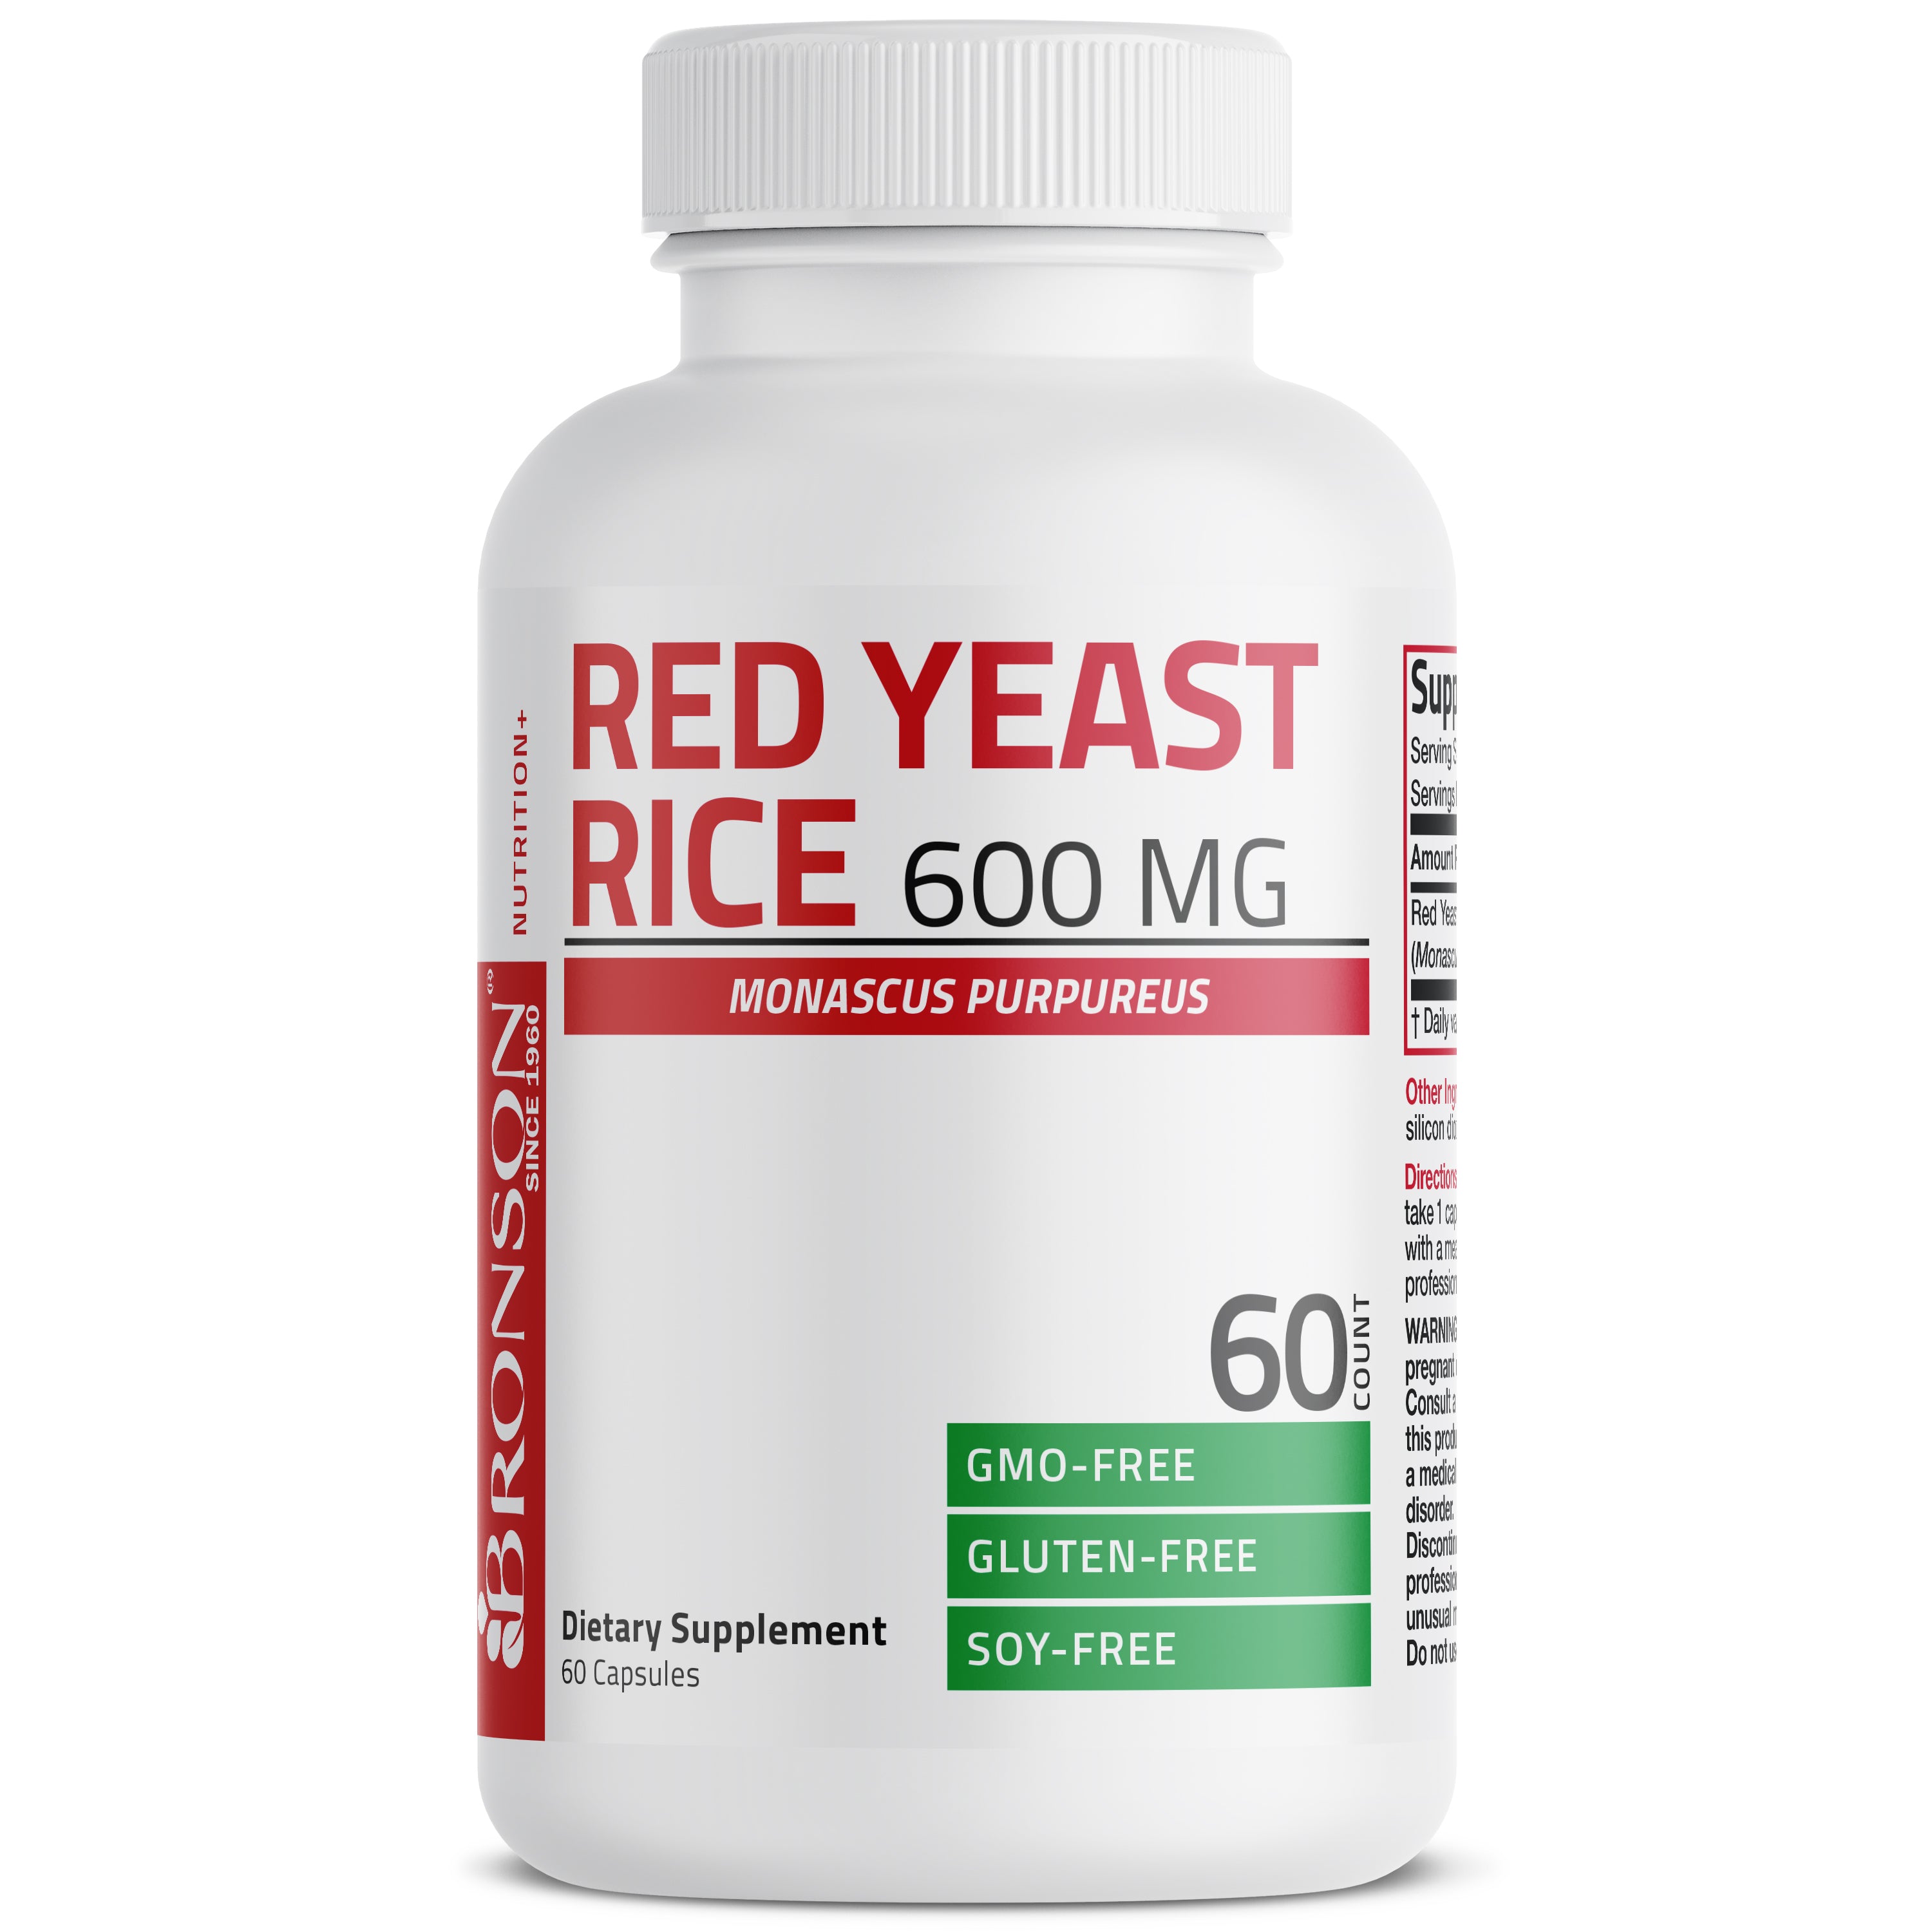 Red Yeast Rice 600 MG view 5 of 4